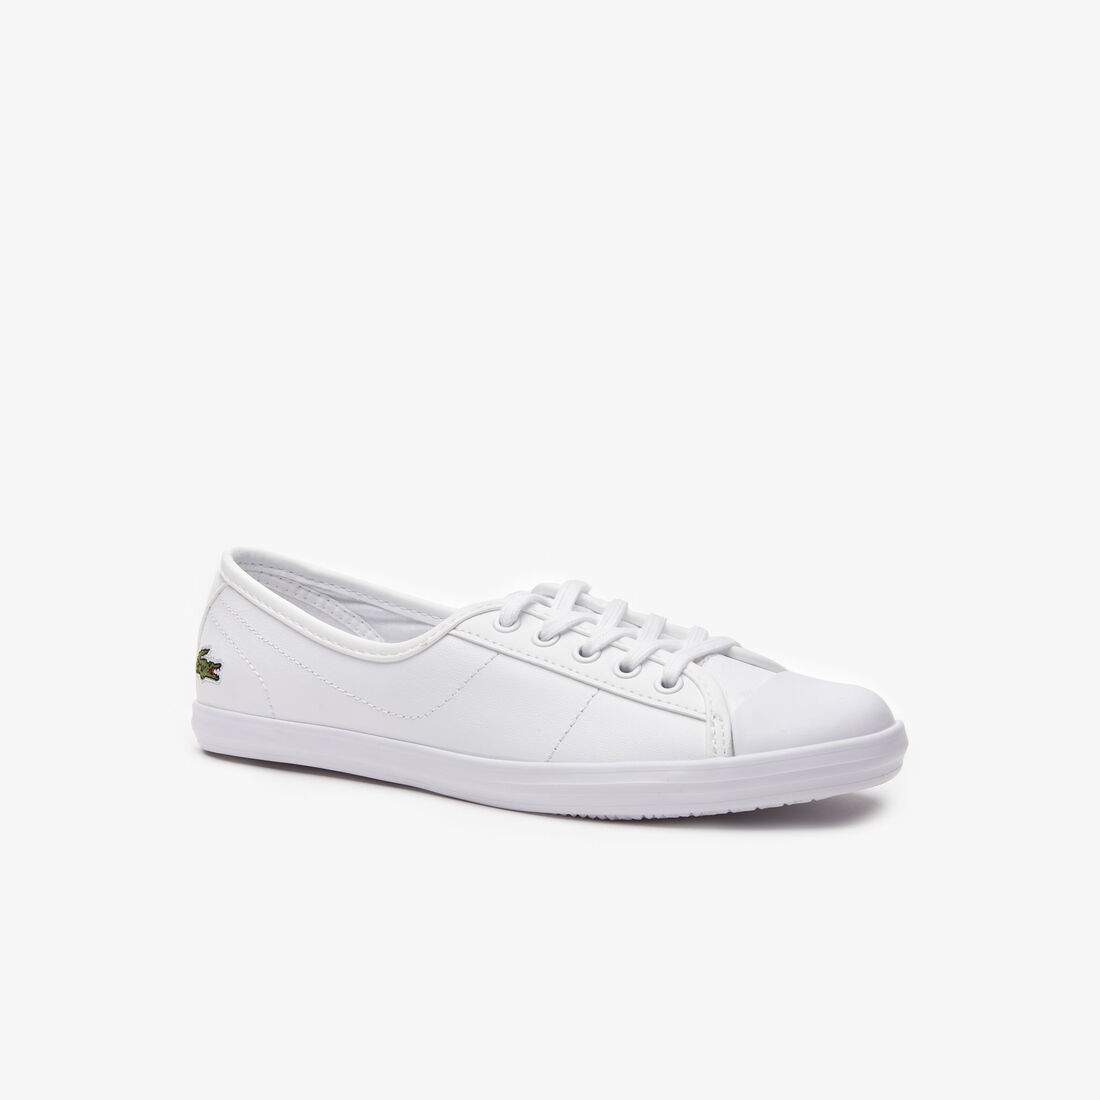 Women's Ziane Leather Trainers